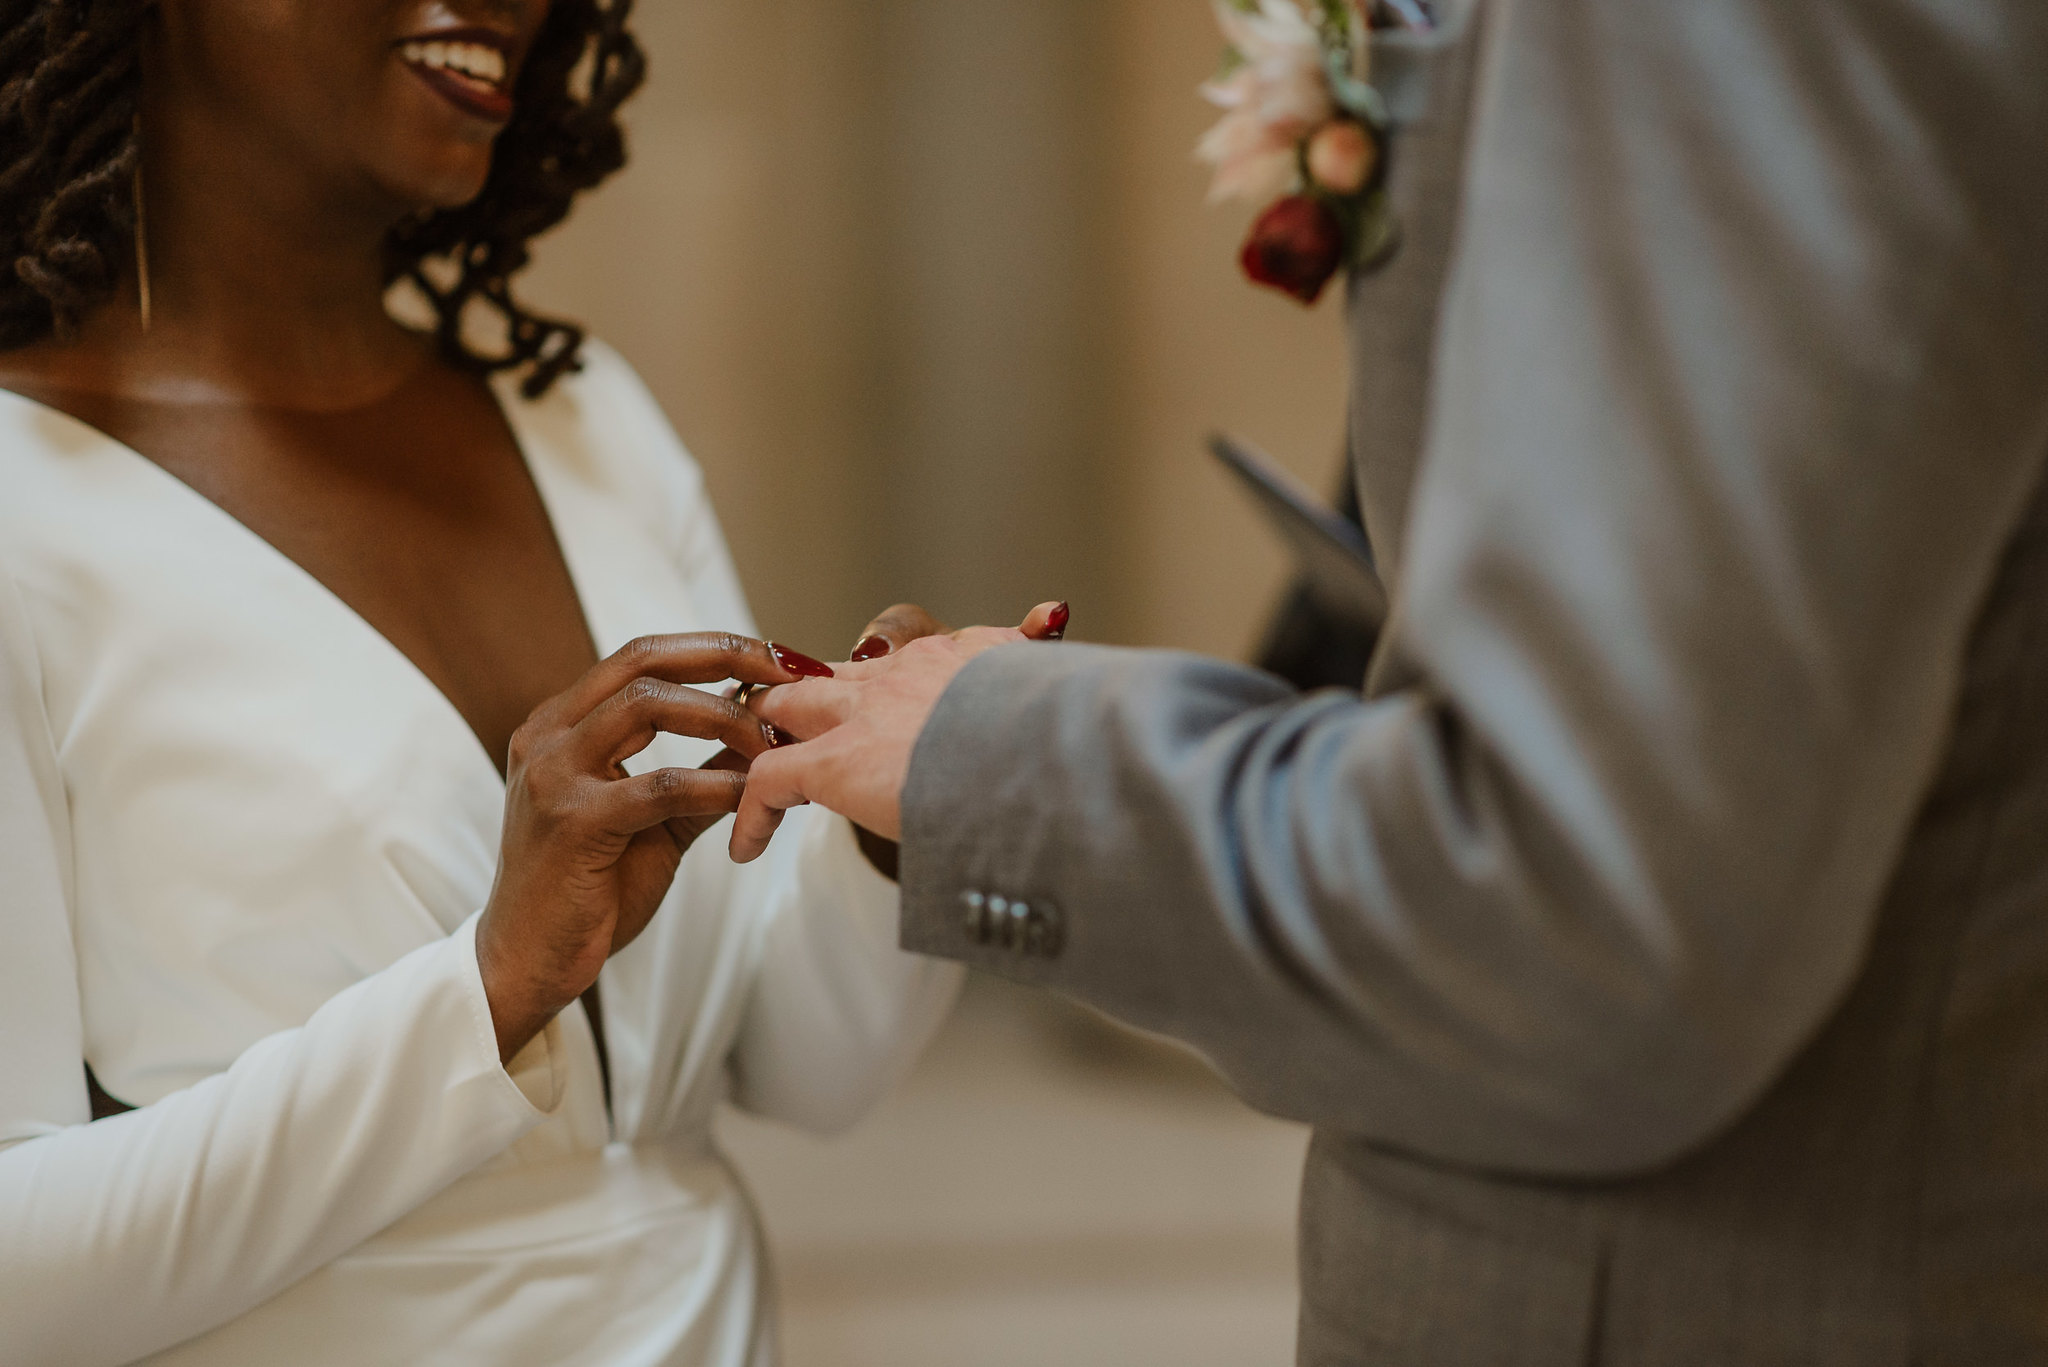 Woman in white dress placing ring on partner's finger during wedding ceremony